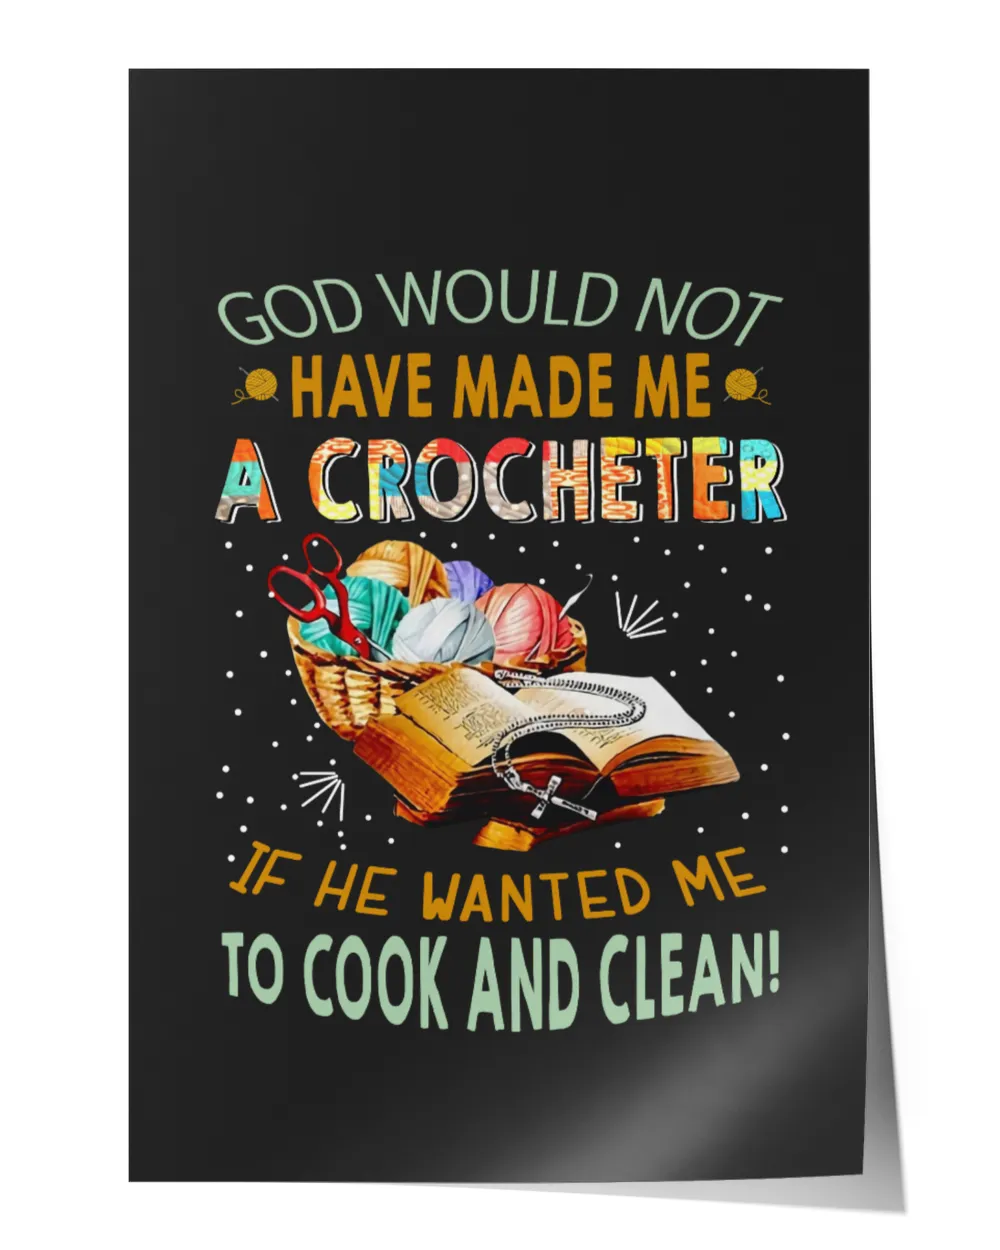 God would not have made me a crocheter